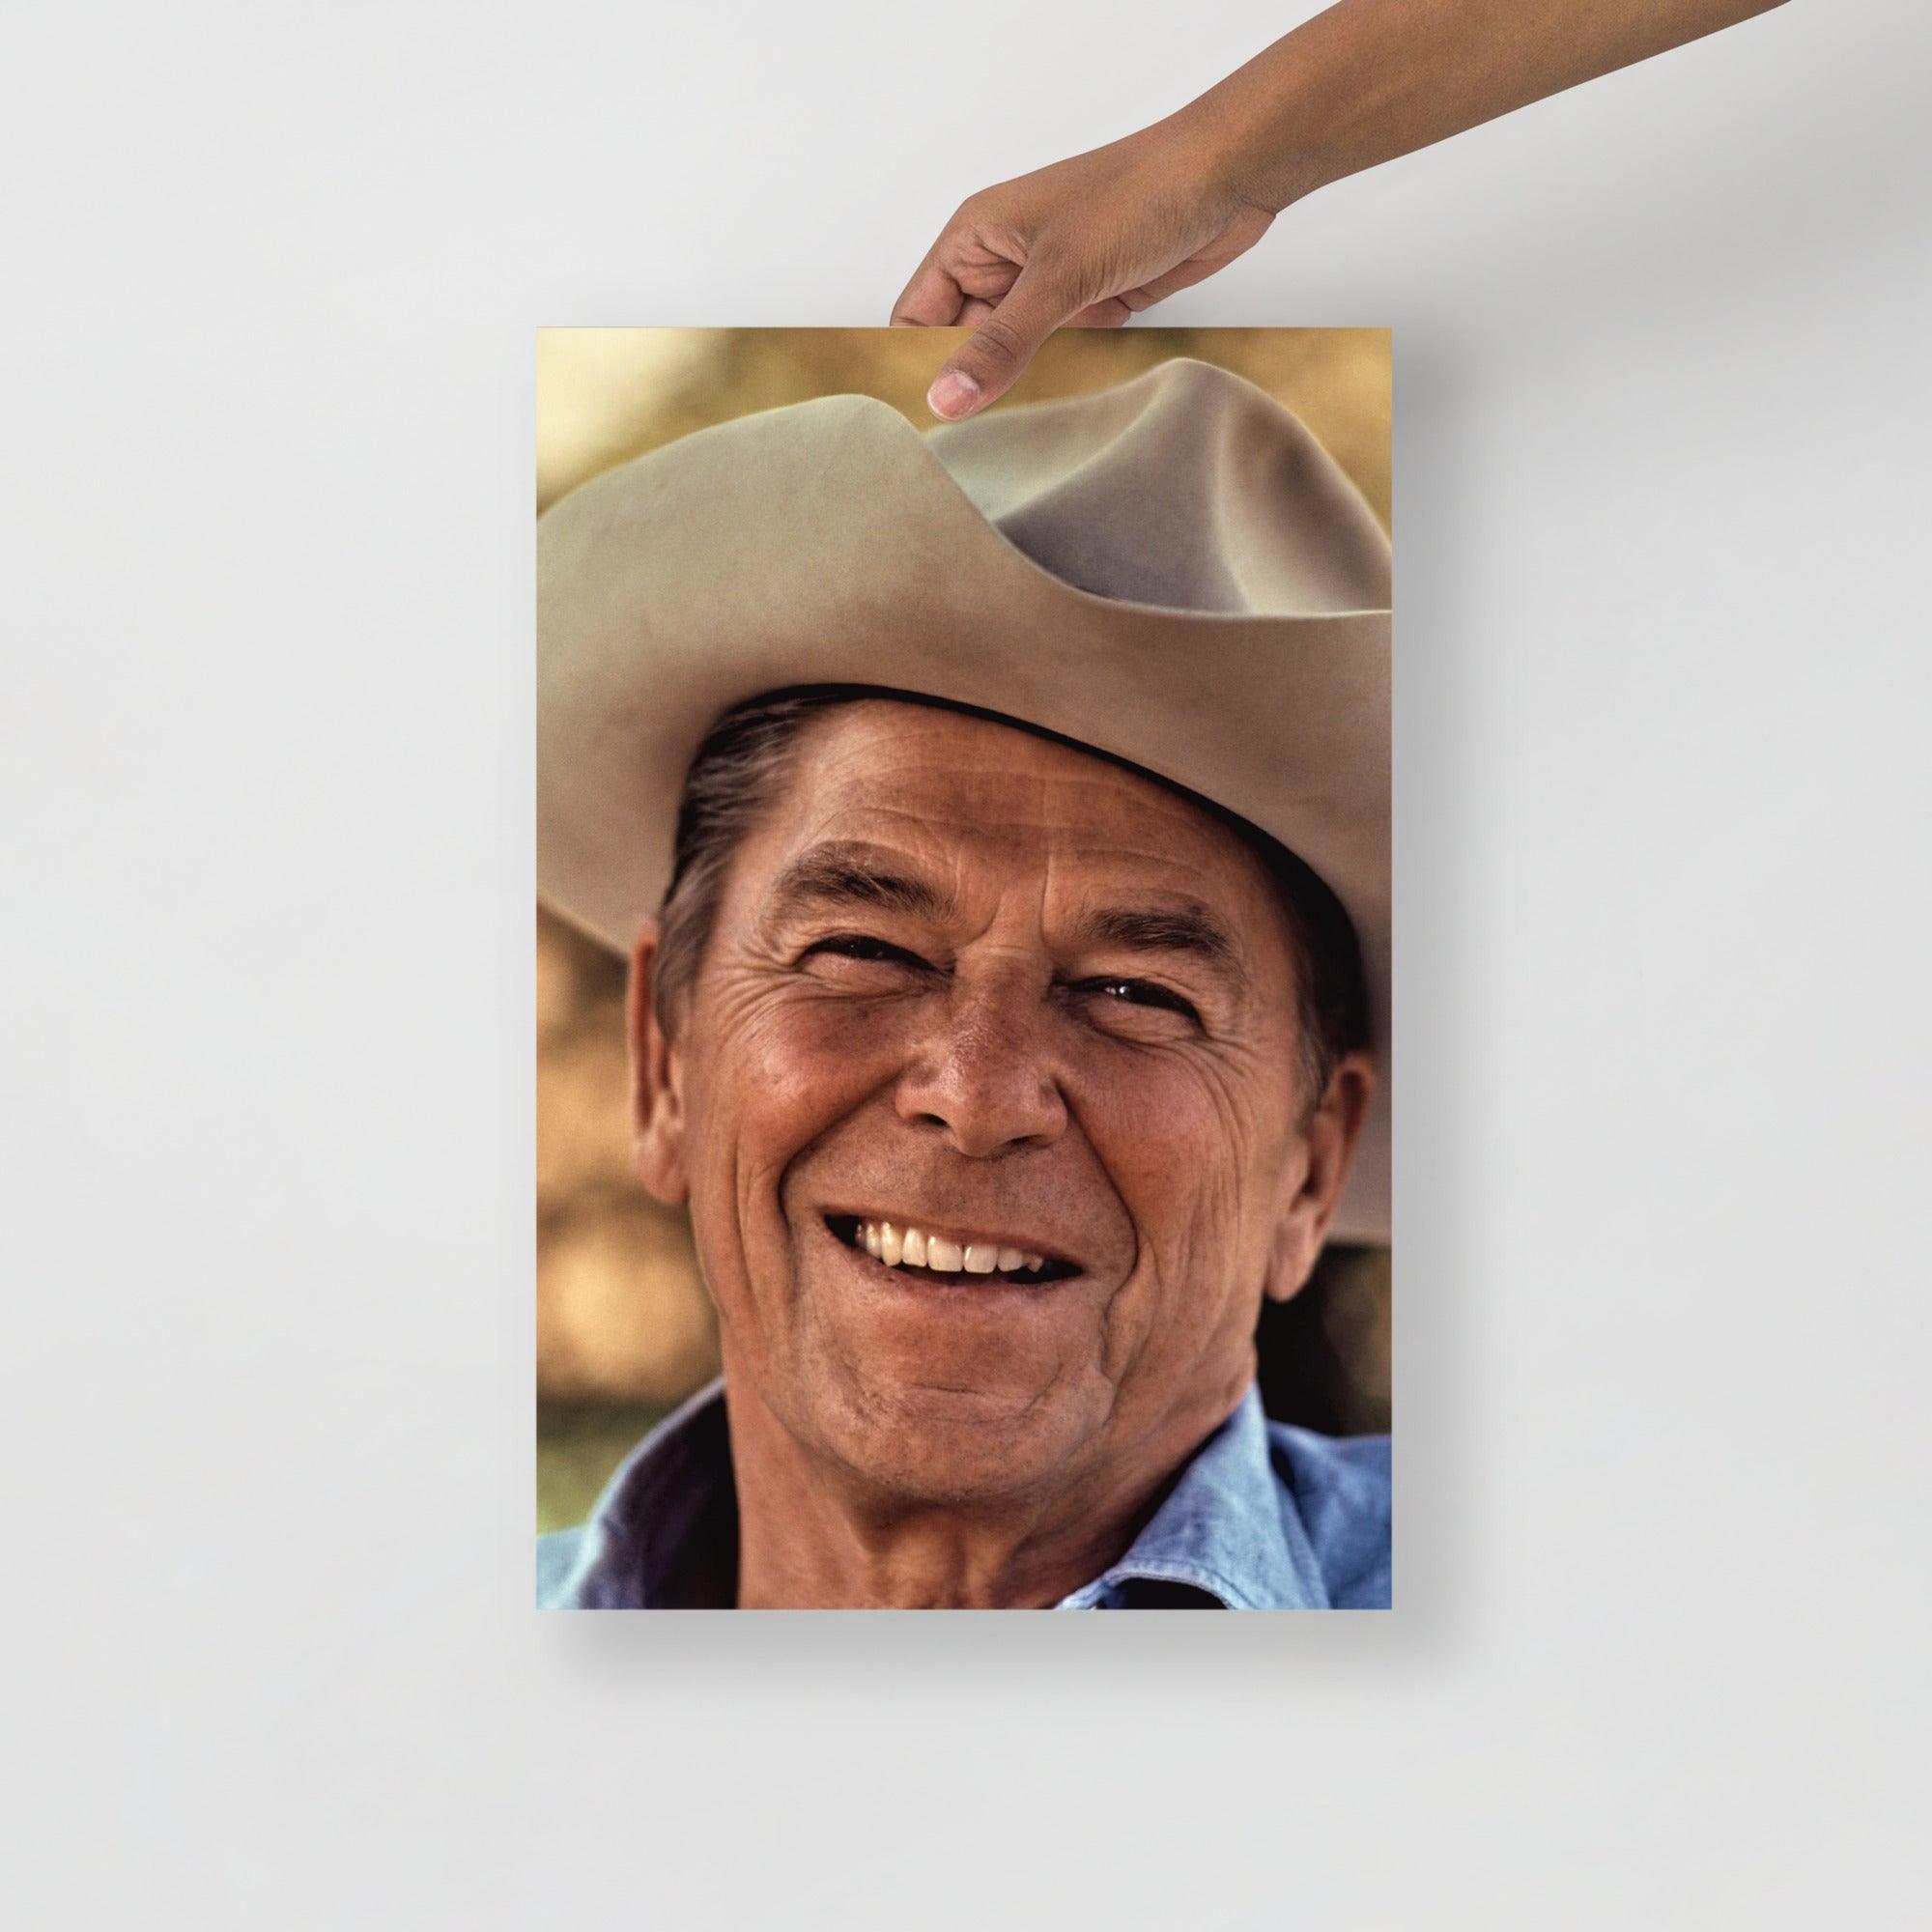 A Ronald Reagan Cowboy Hat poster on a plain backdrop in size 12x18”.